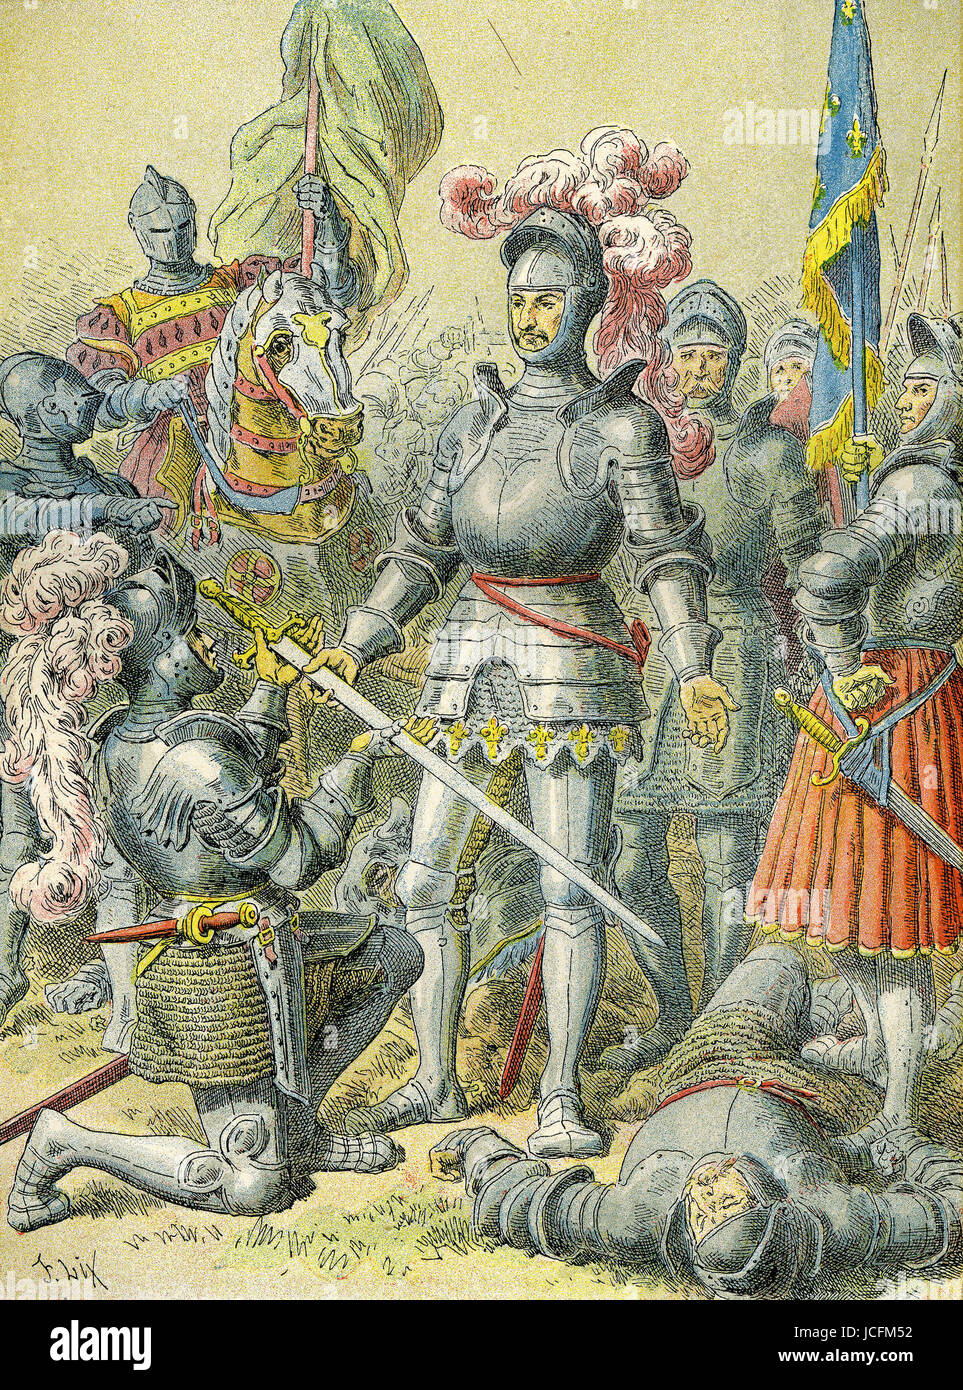 Francis Ist. Battle of Pavia. The Battle of Pavia (24th February 1525) was a descisive event during the sixth of the Italian wars (1521-1526). The battle marks the defeat of the Kings of France in their attempt at gaining dominion over the north of Italy. Stock Photo